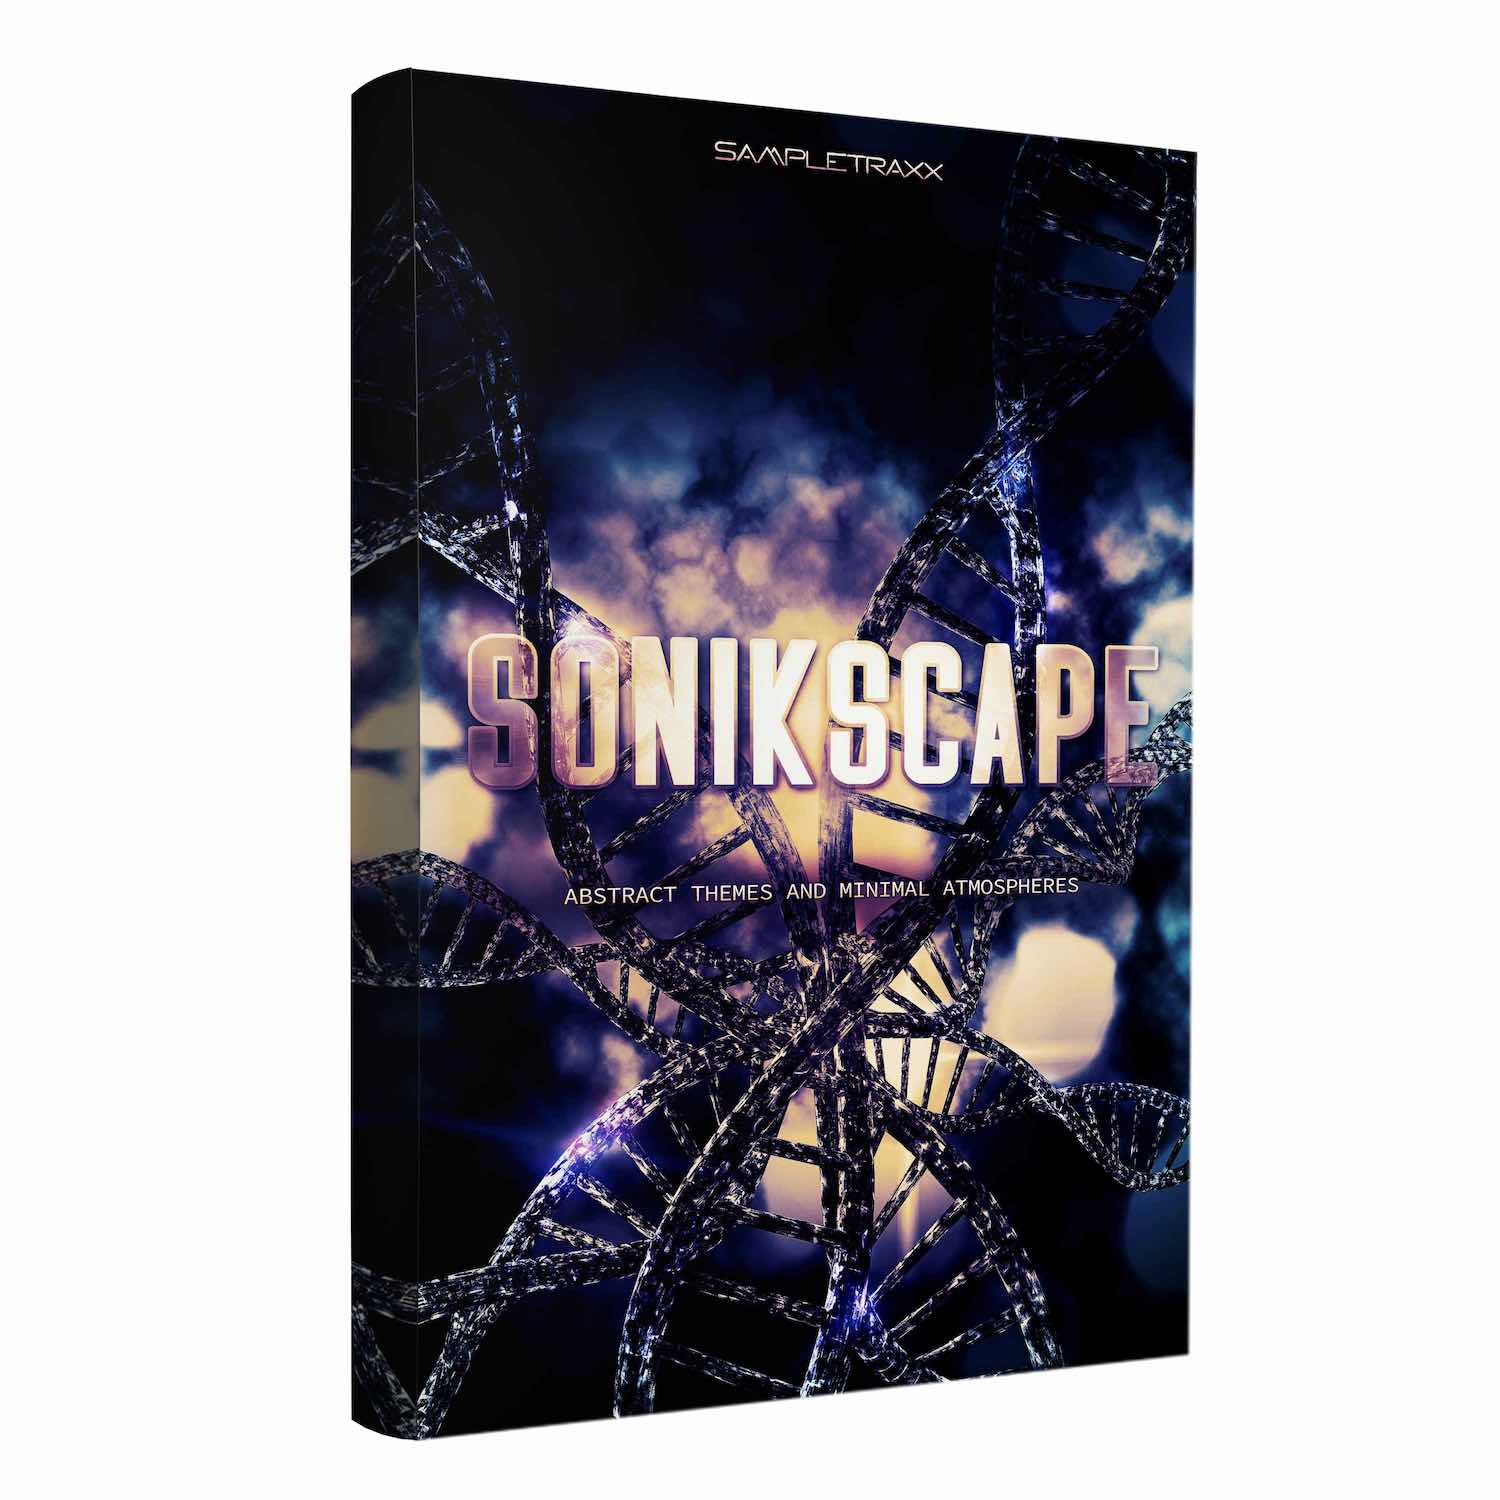 Sonikscape Review – a Dark Cinematic Atmospheres collection by SampleTraxx